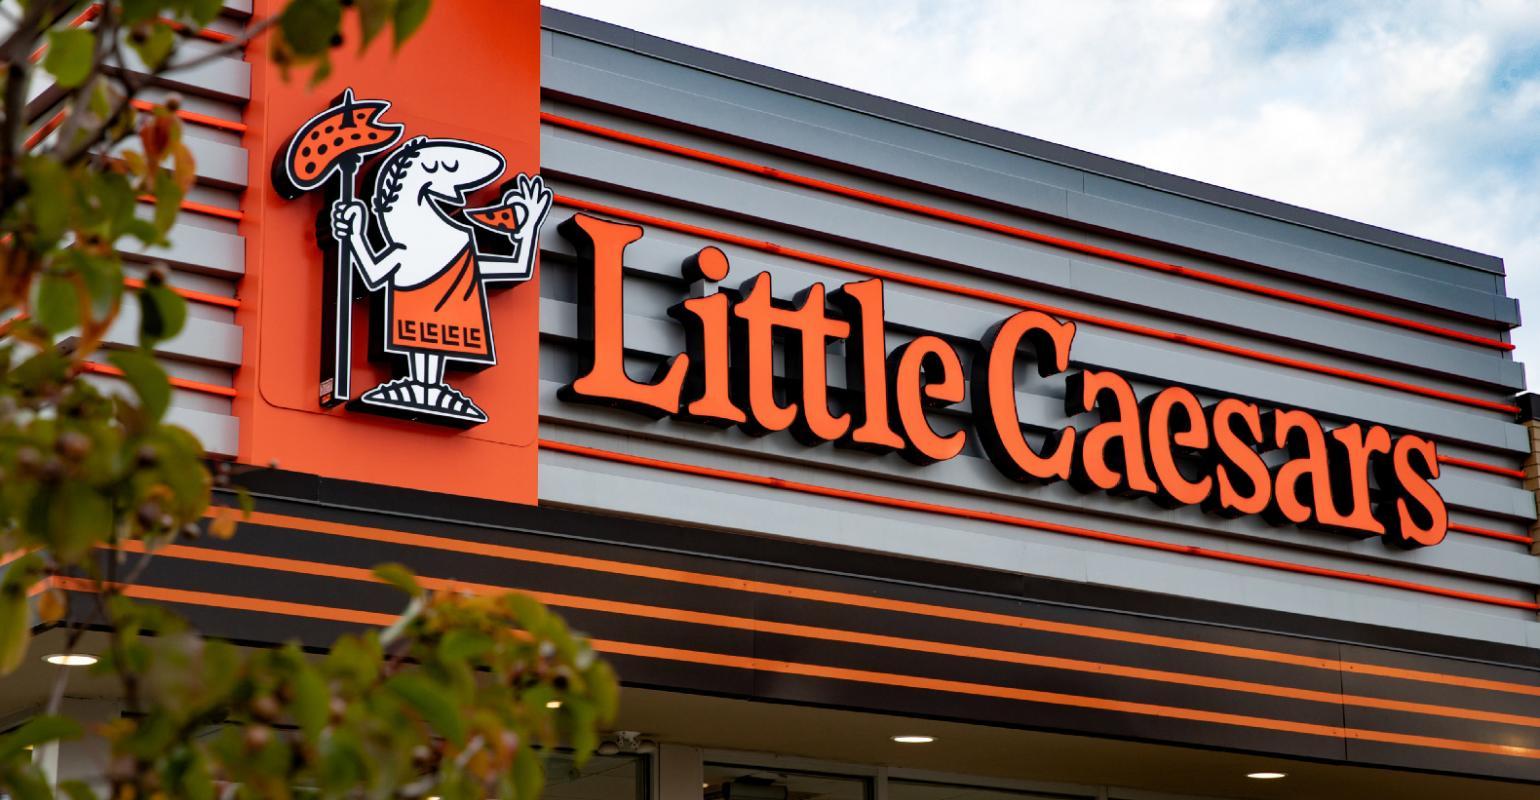 How Very little Caesars is leveraging tech investment and enhancement